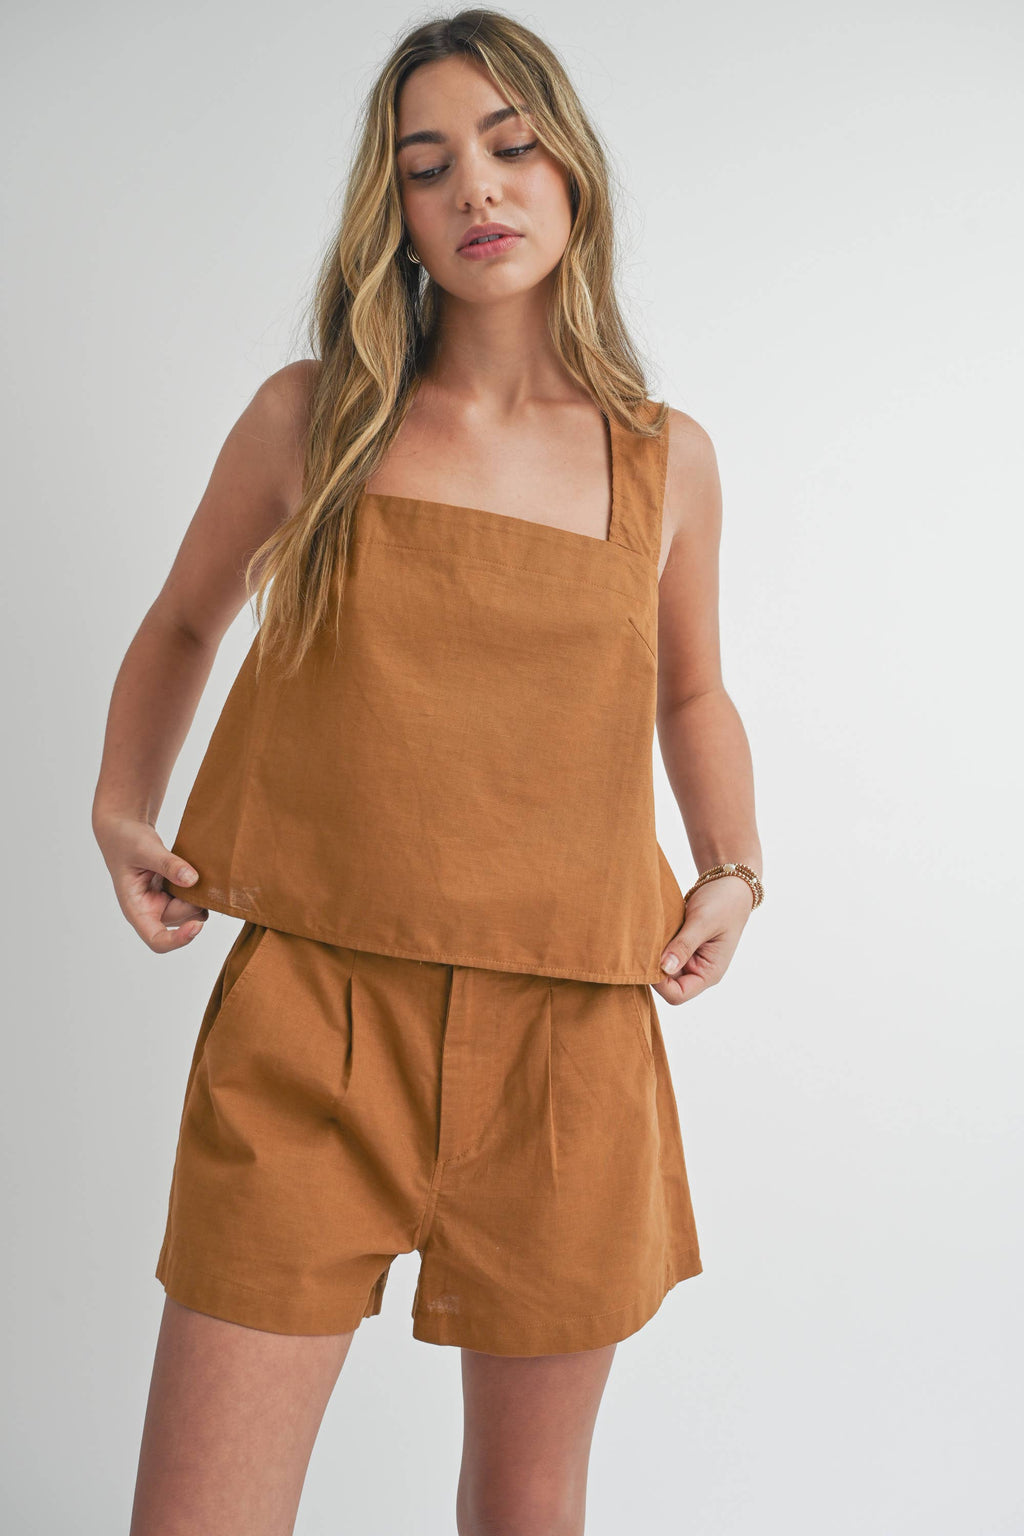 T3187ST CROSSED BACK DETAIL LINEN TOP: S / TOFFEE